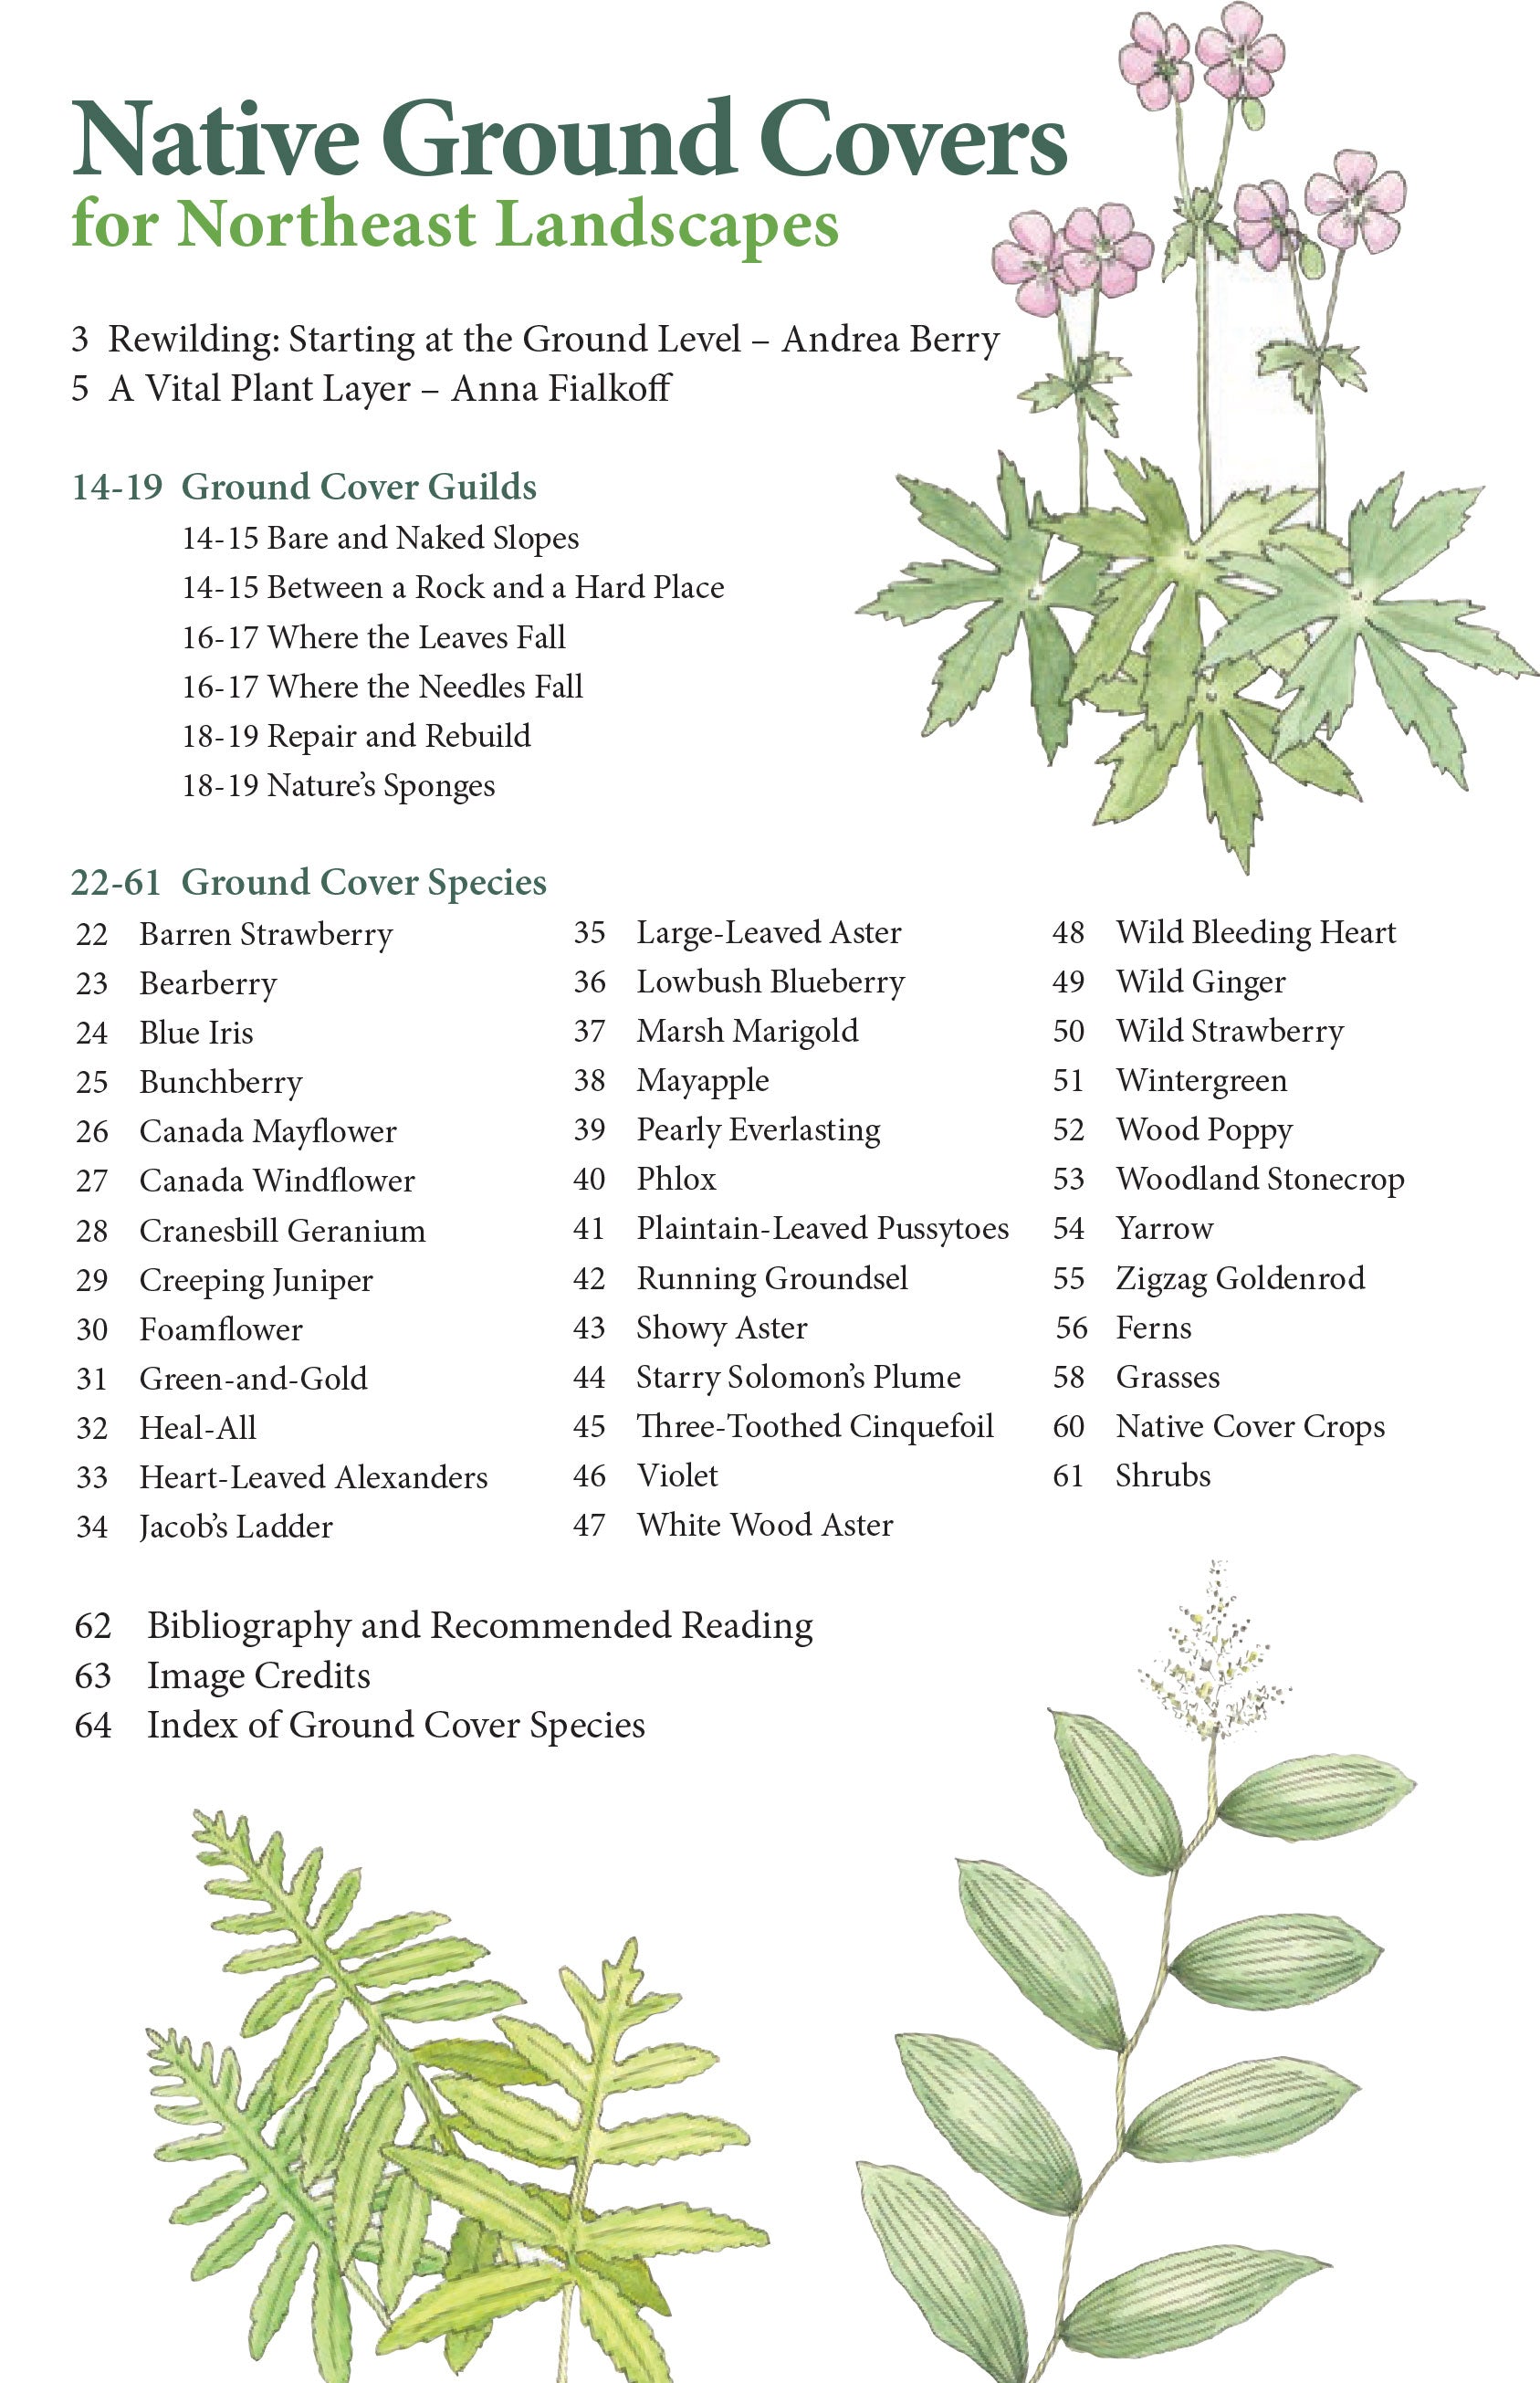 Table of contents for Native Ground Covers for Northeast Landscapes